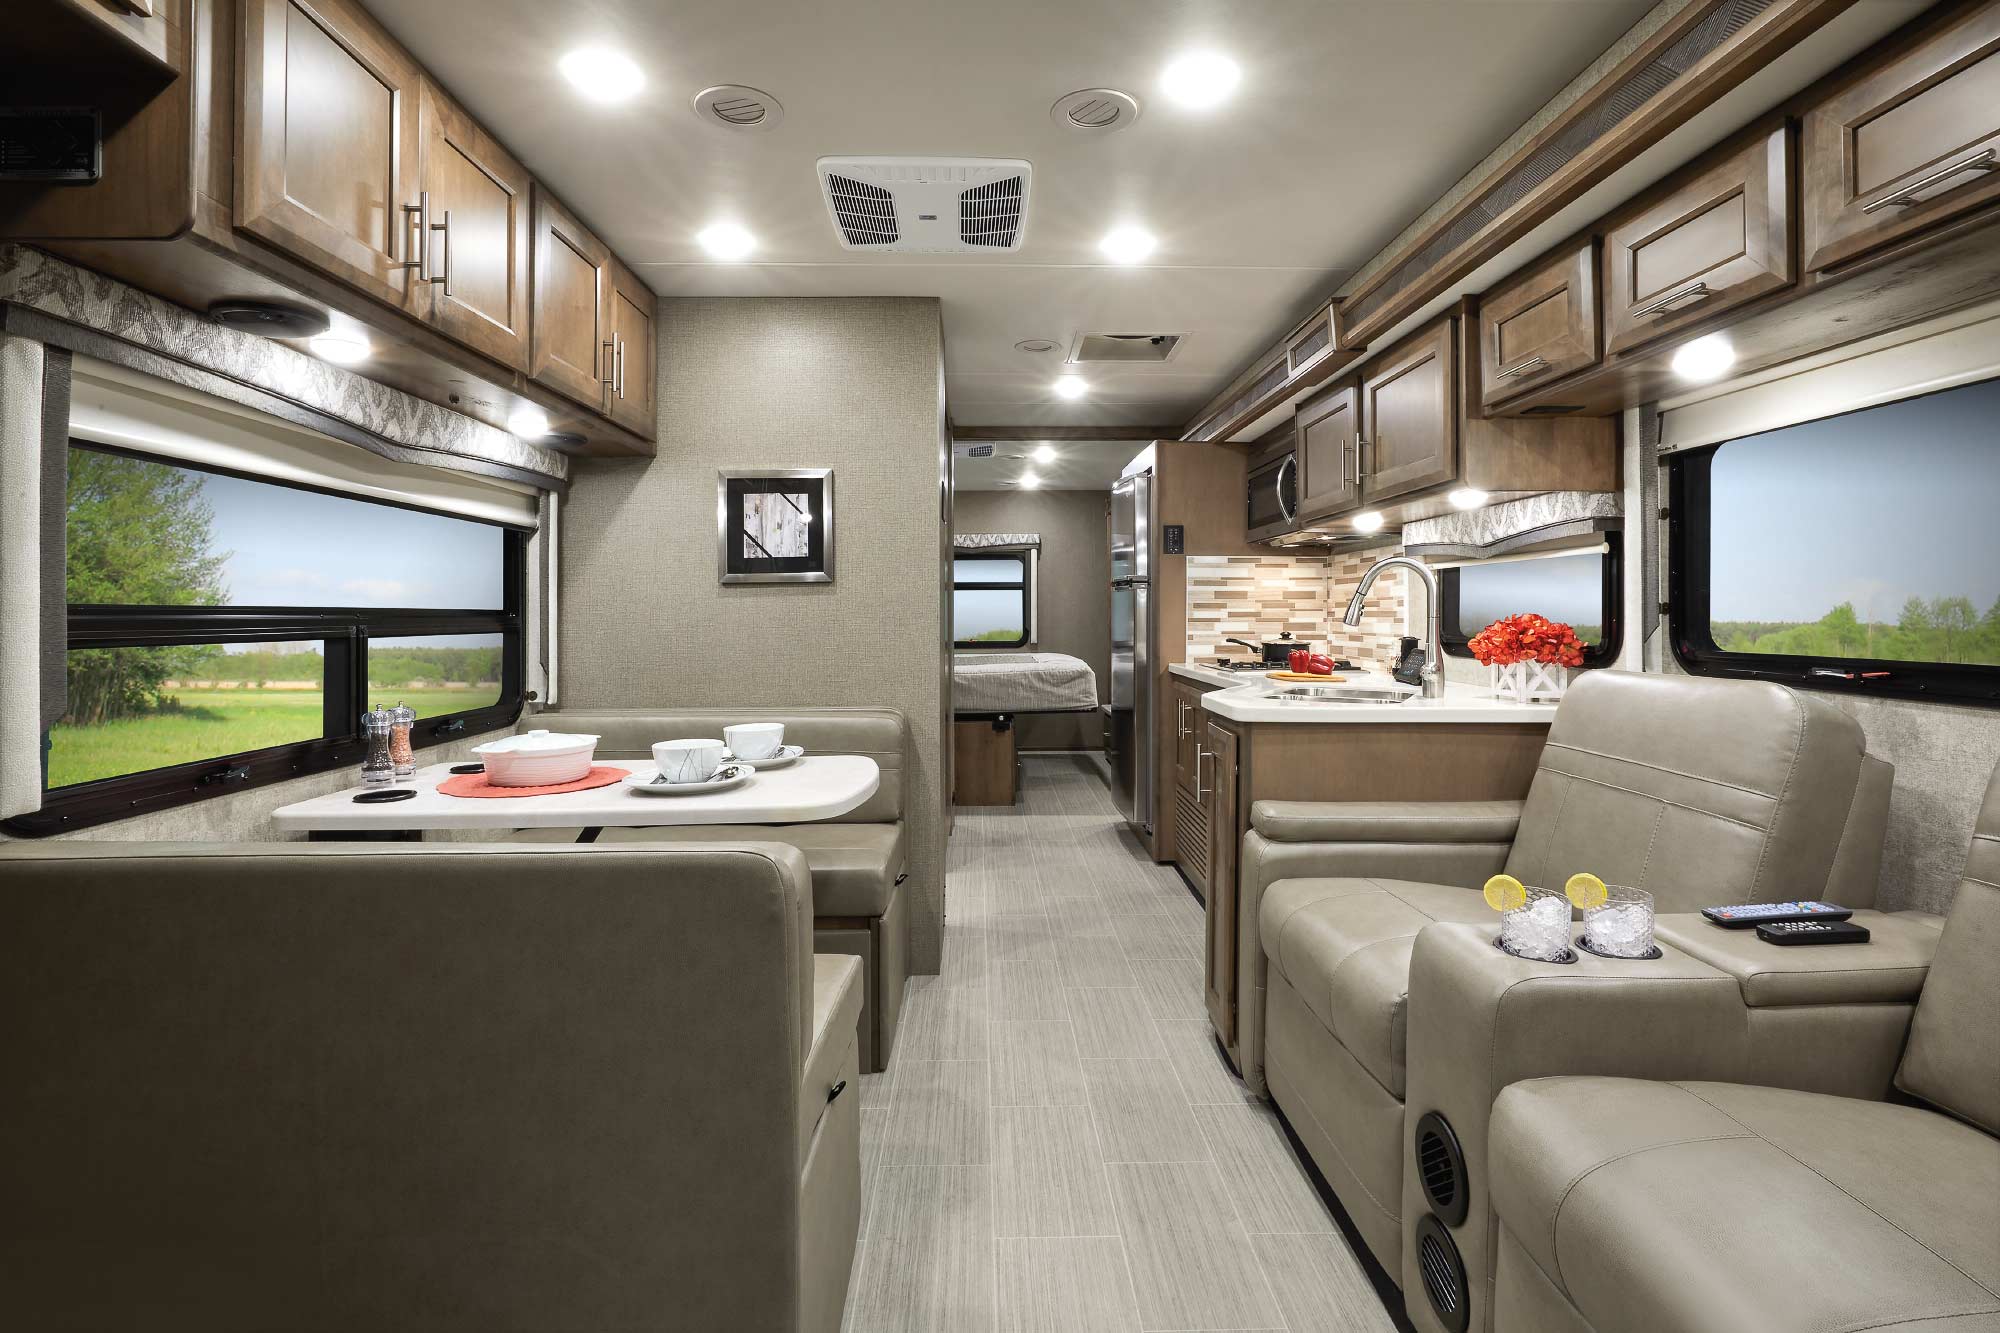 Super C Rv Upgrades For 2021, Super C Rv With Bunk Beds